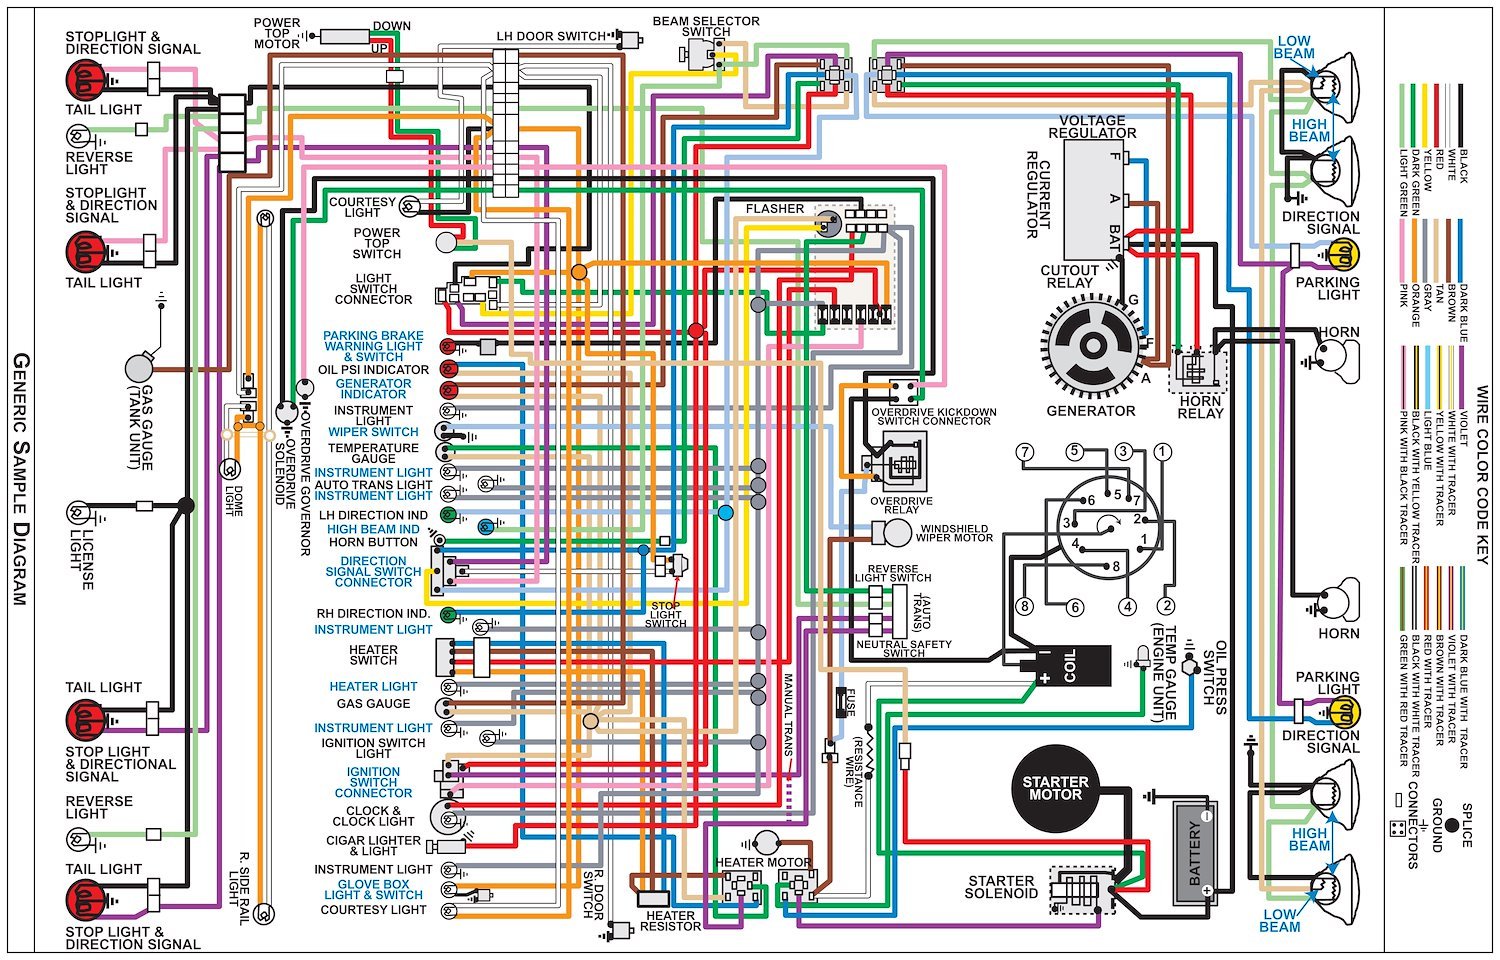 Wiring Diagram for 1967 Ford E-Series (Econoline), 11